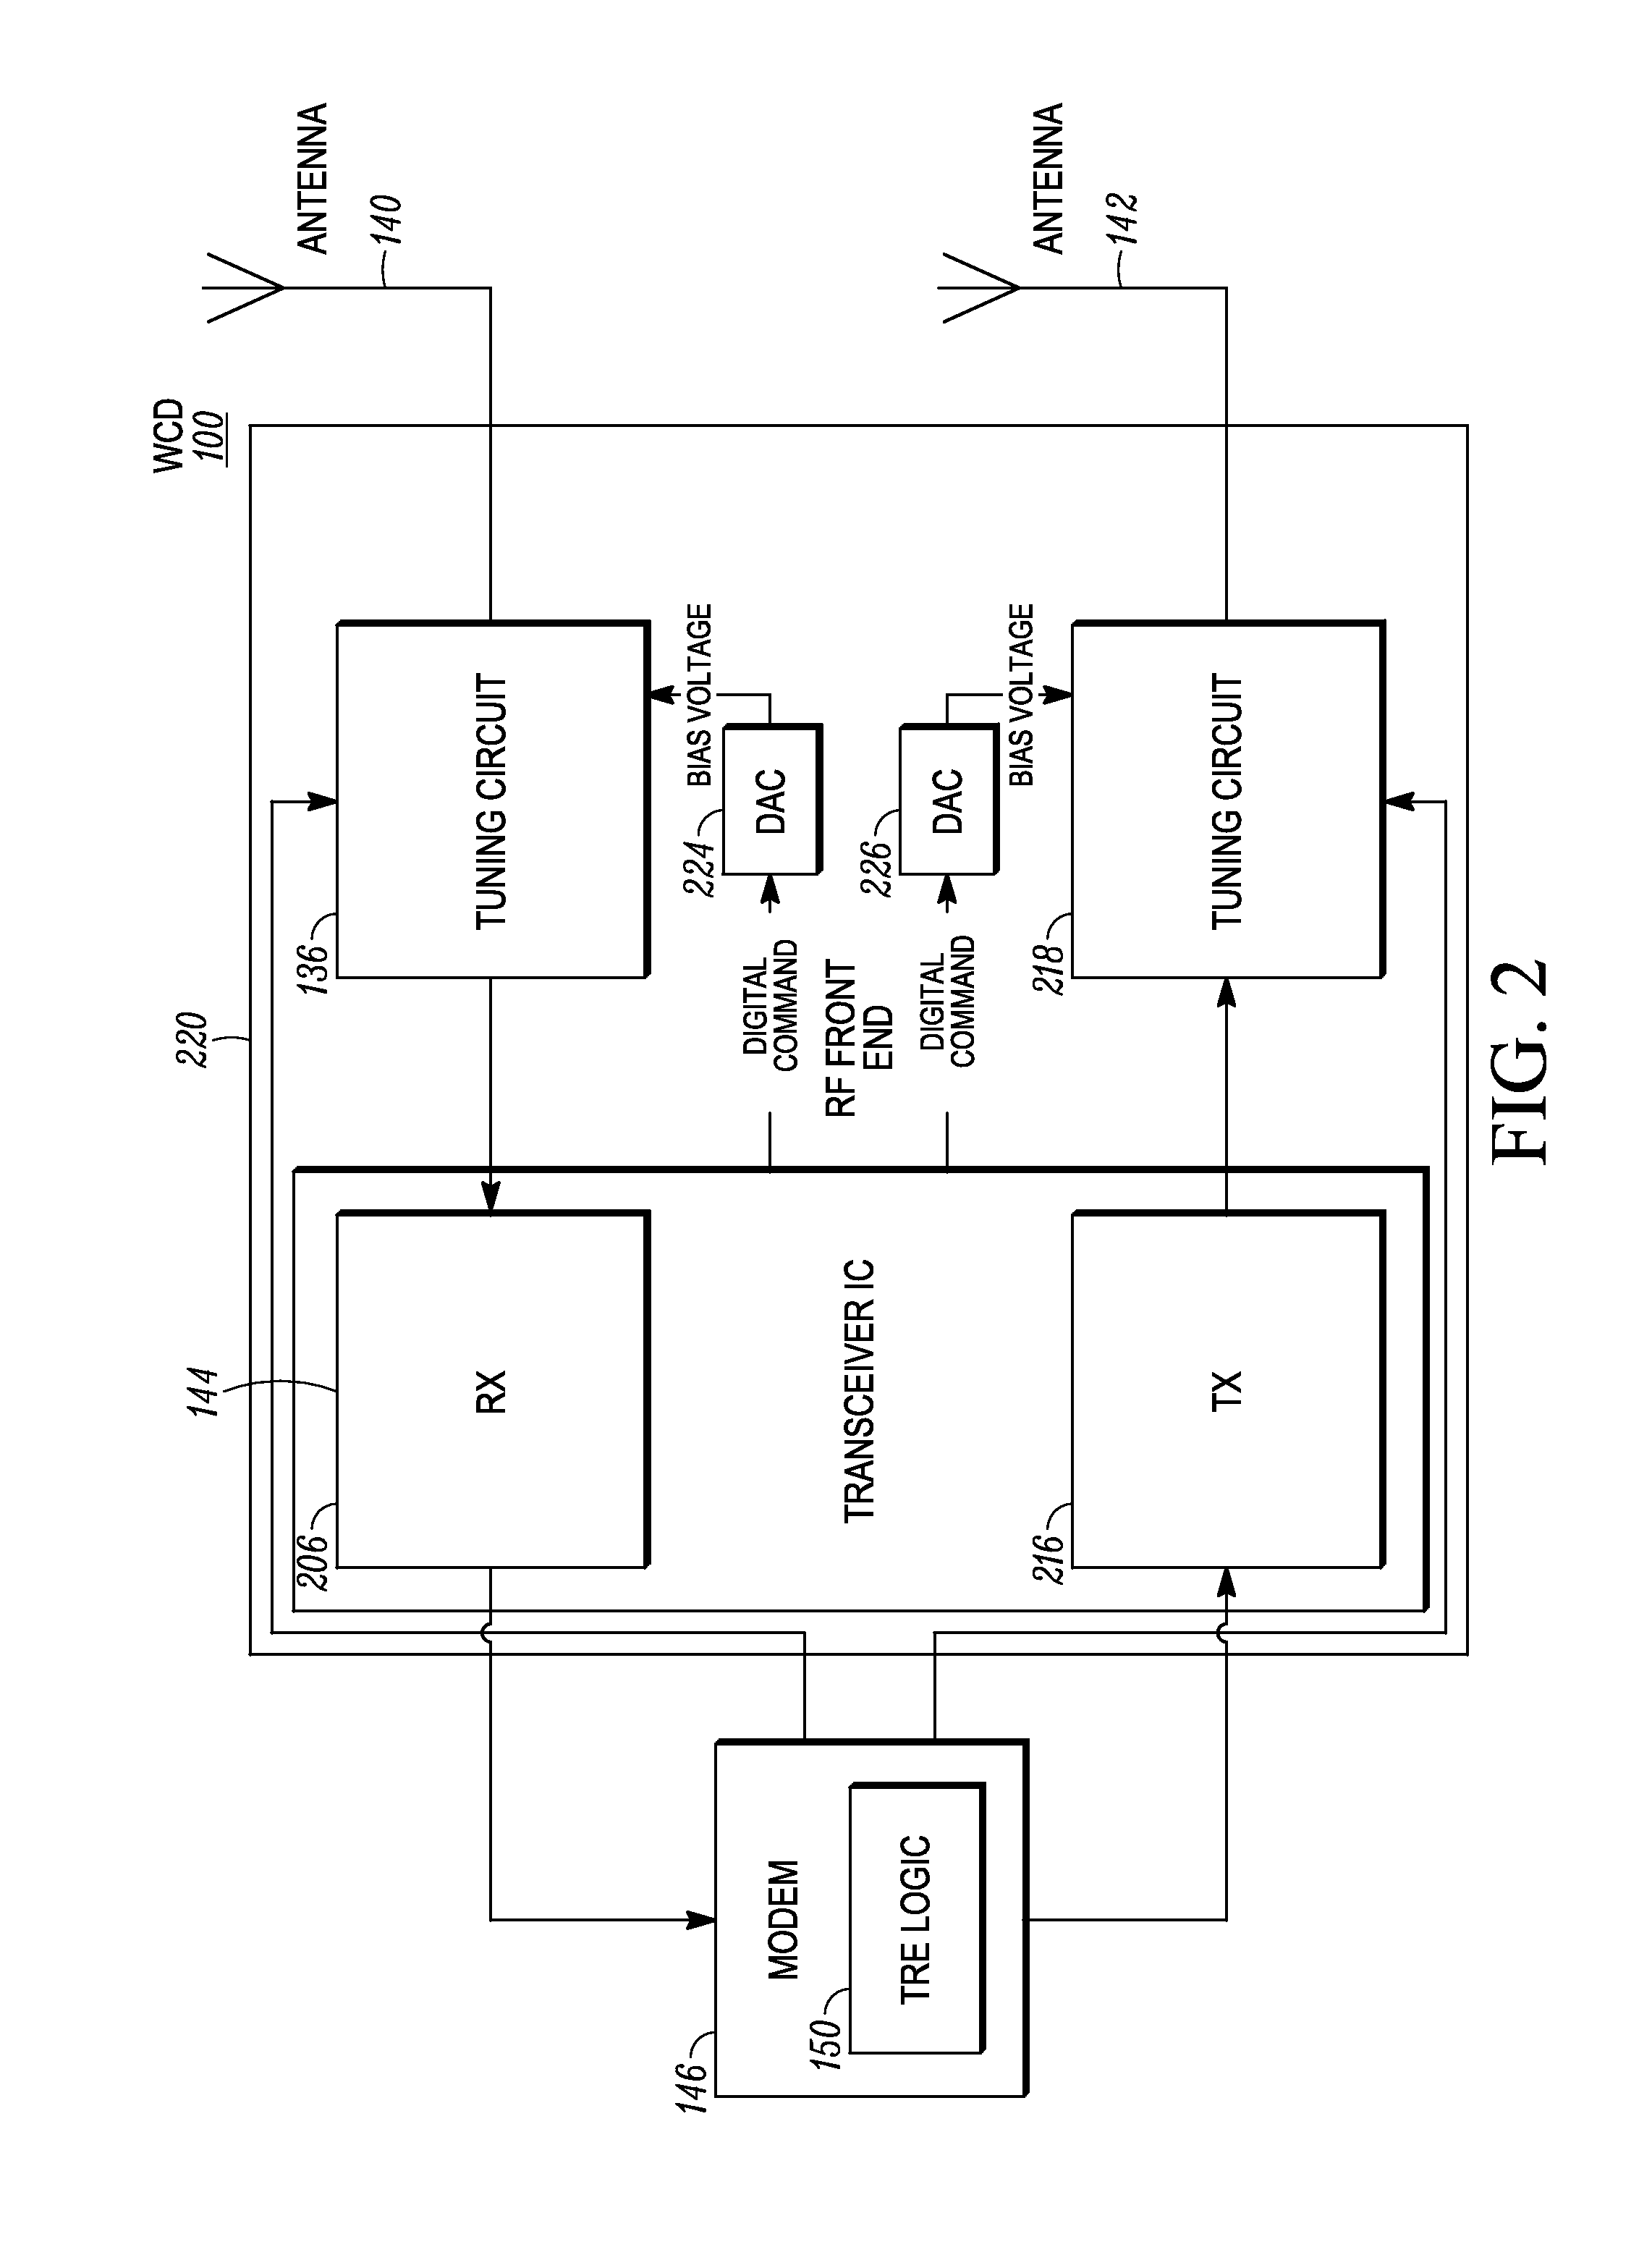 Method and system to improve antenna tuner reliability